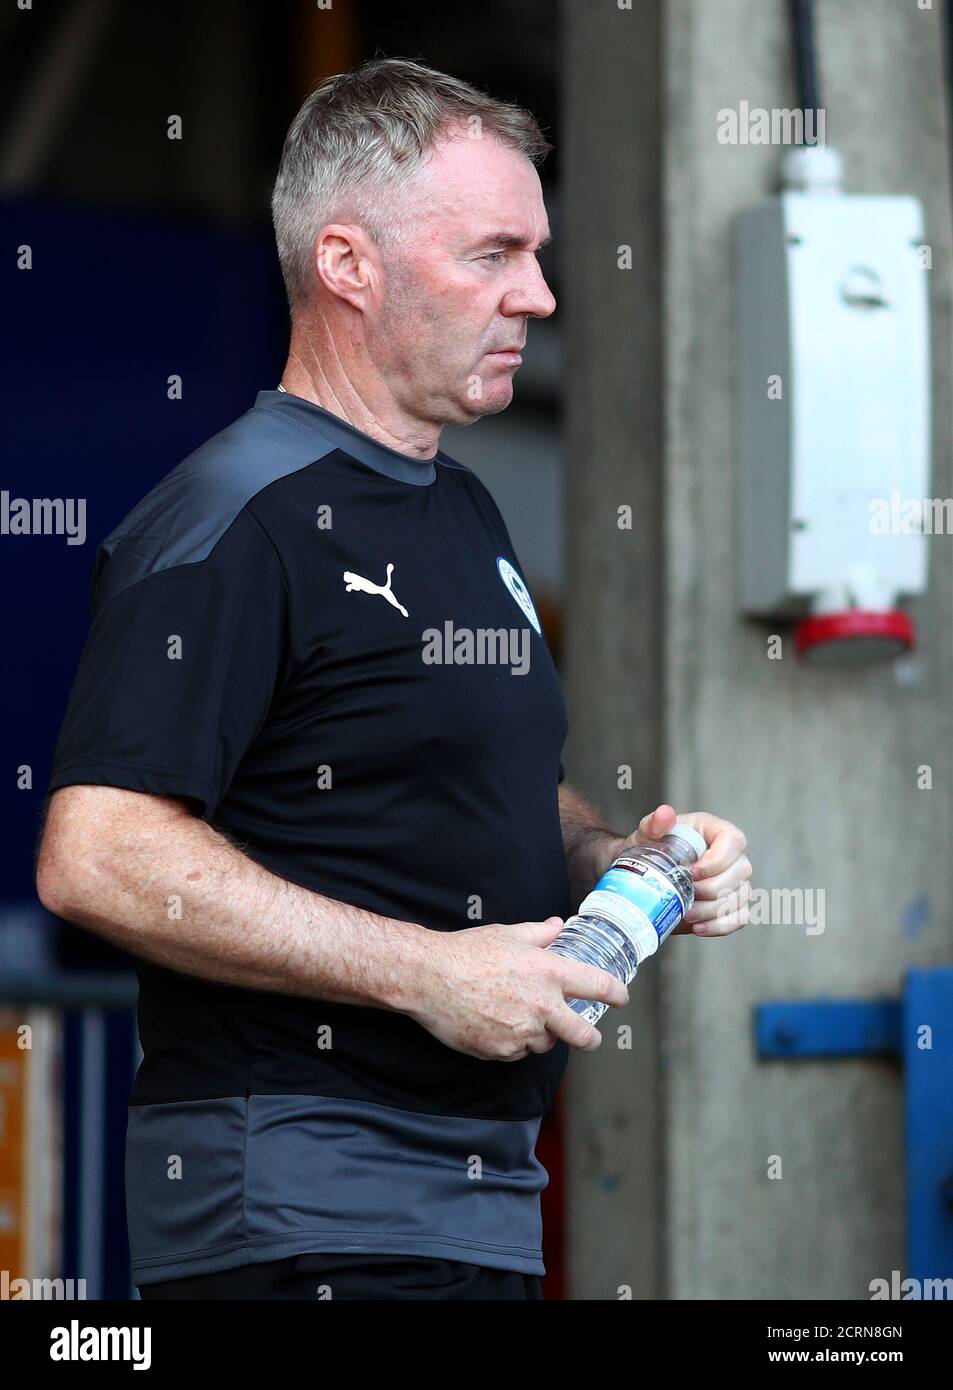 Manager of Wigan Athletic, John Sheridan - Ipswich Town v Wigan Athletic, Sky Bet League One, Portman Road, Ipswich, UK - 13th September 2020  Editorial Use Only - DataCo restrictions apply Stock Photo